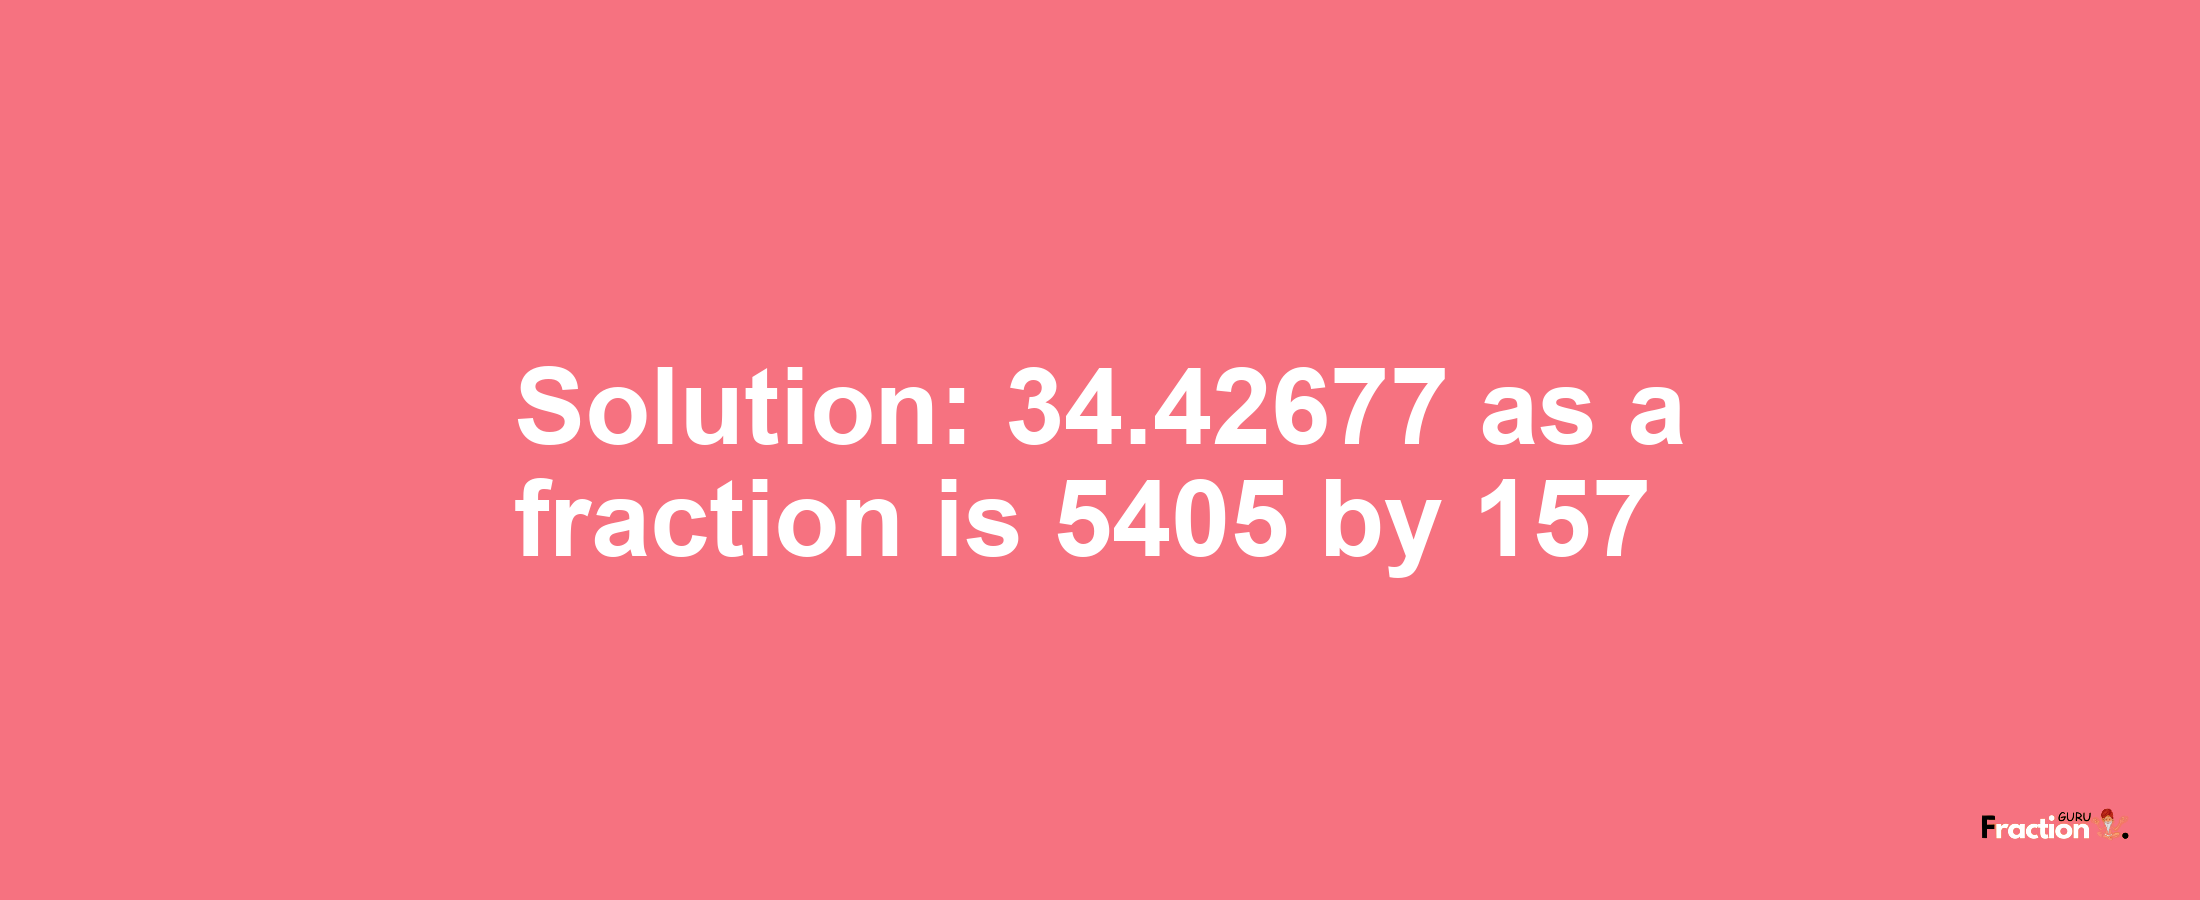 Solution:34.42677 as a fraction is 5405/157